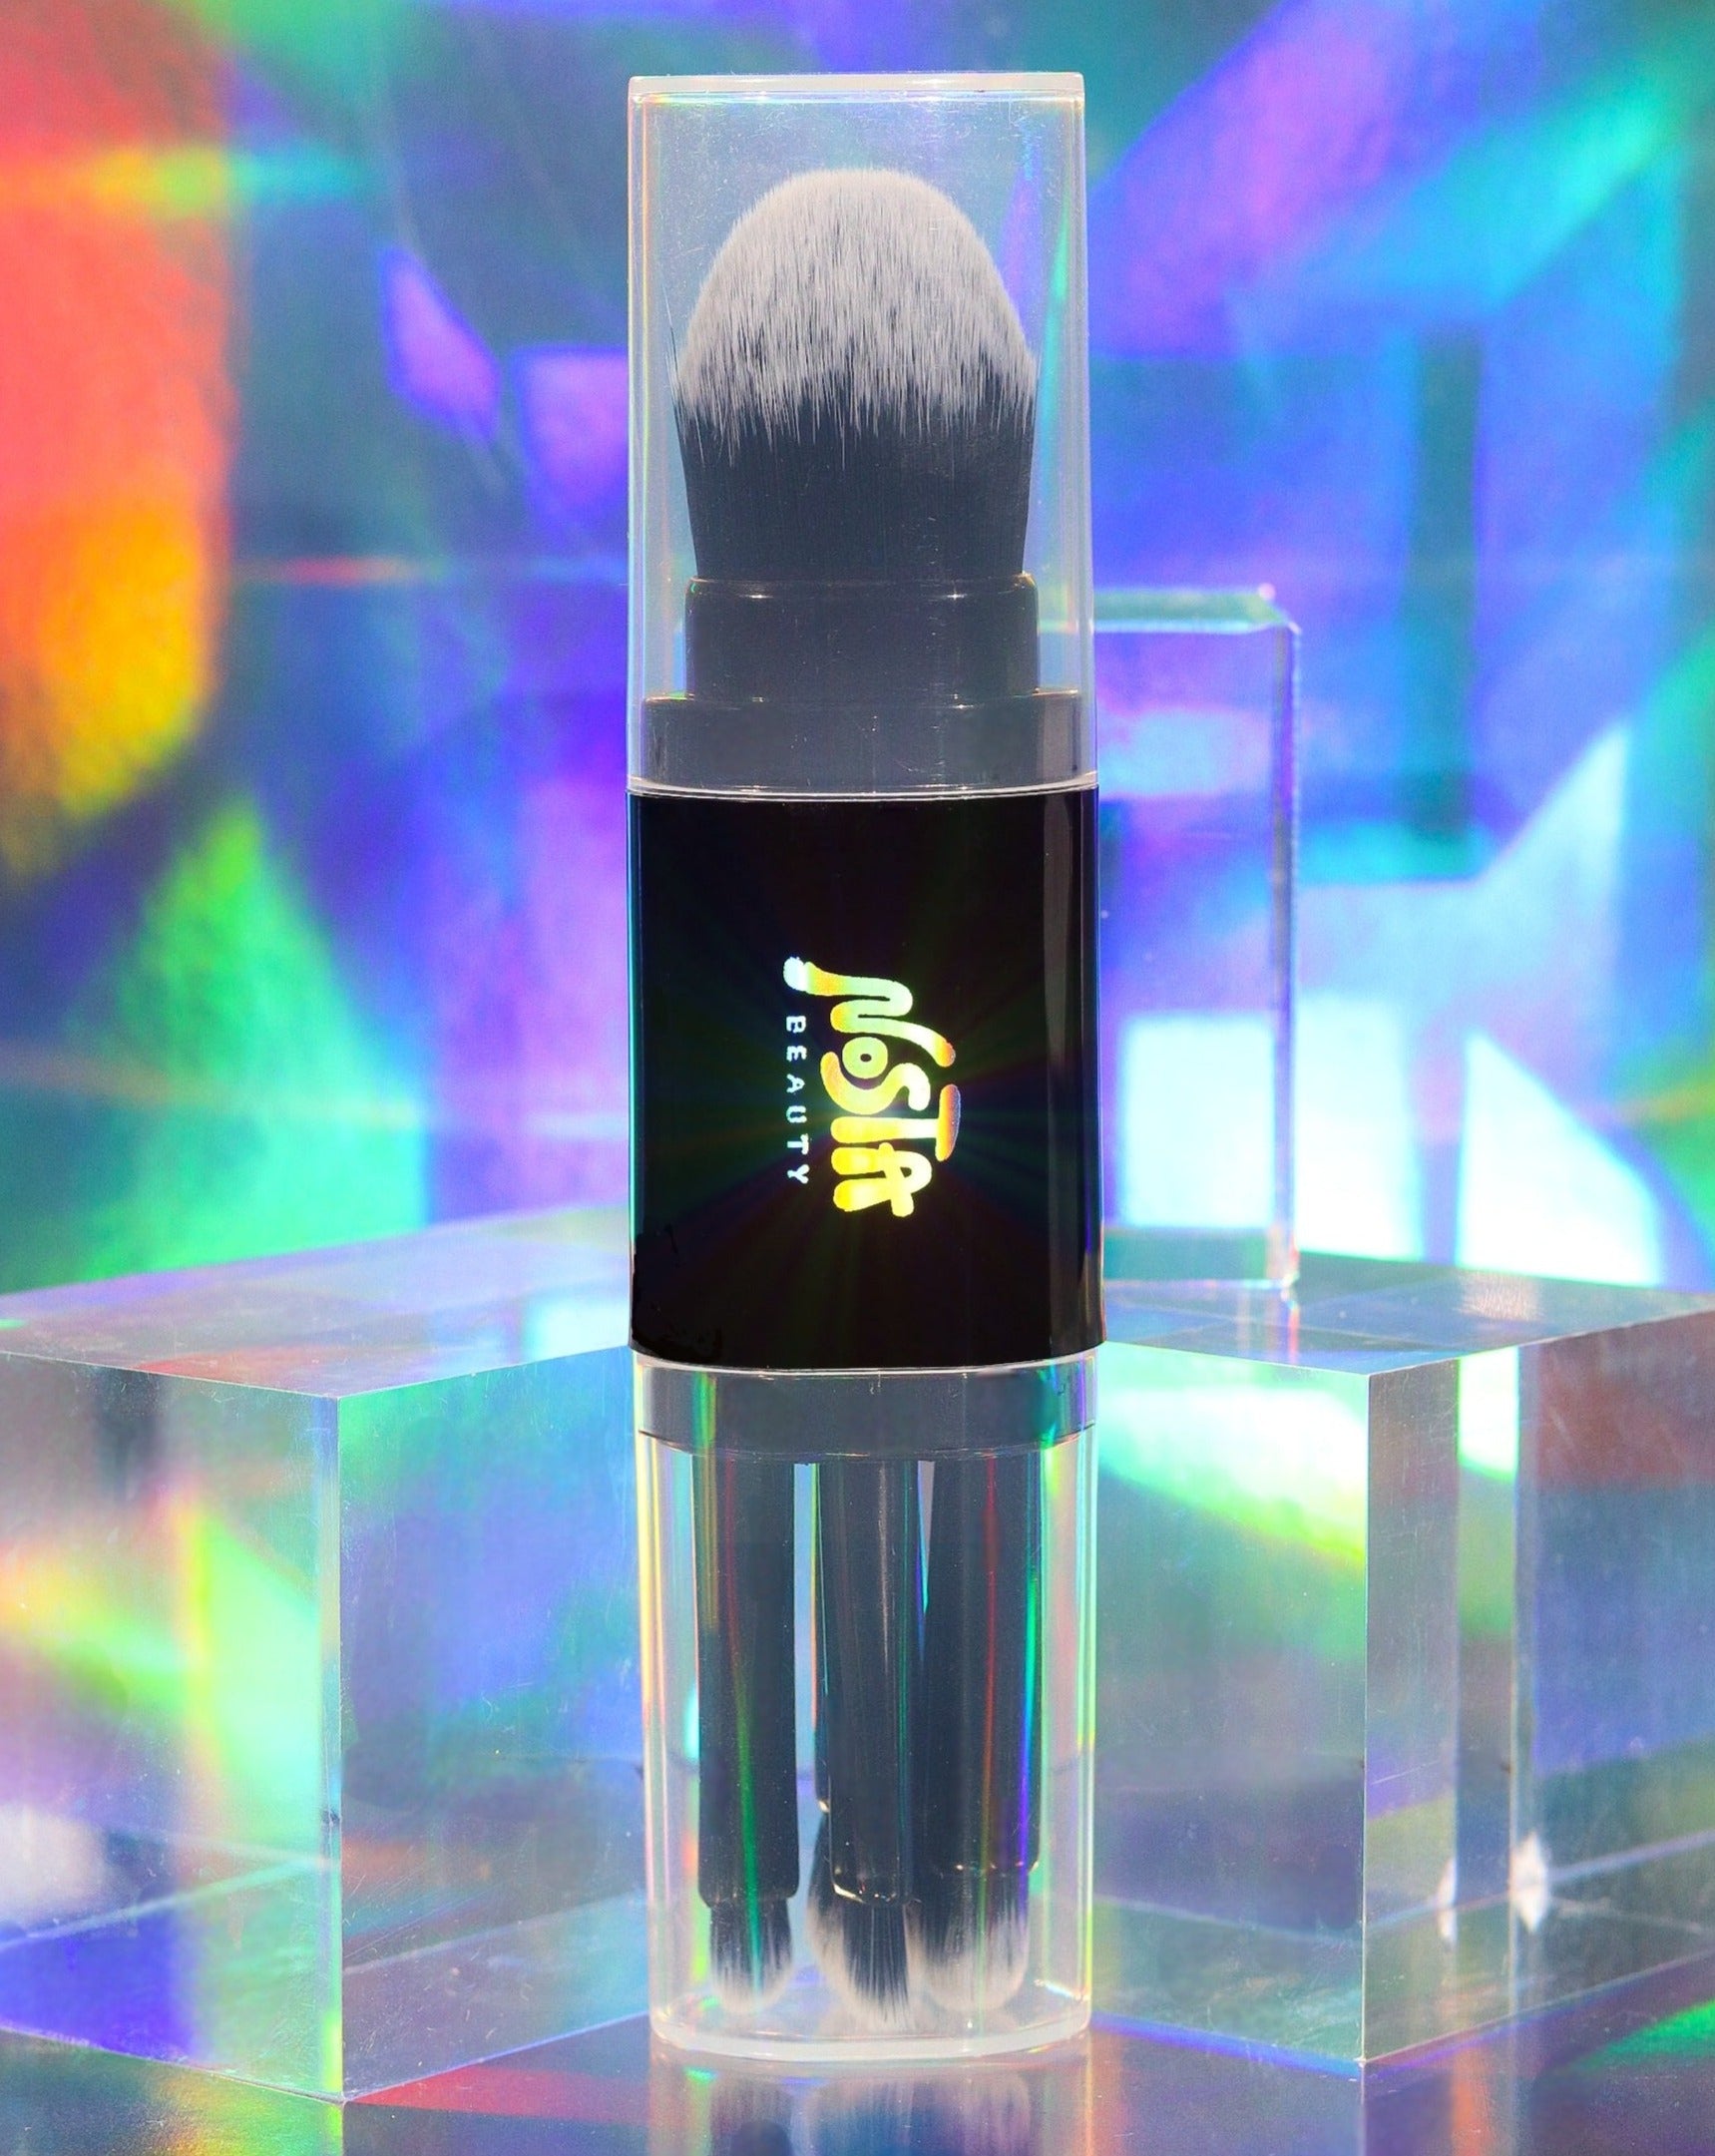 This is Nosta Beauty's all in one vegan makeup brush set with caps on, against a holographic background.